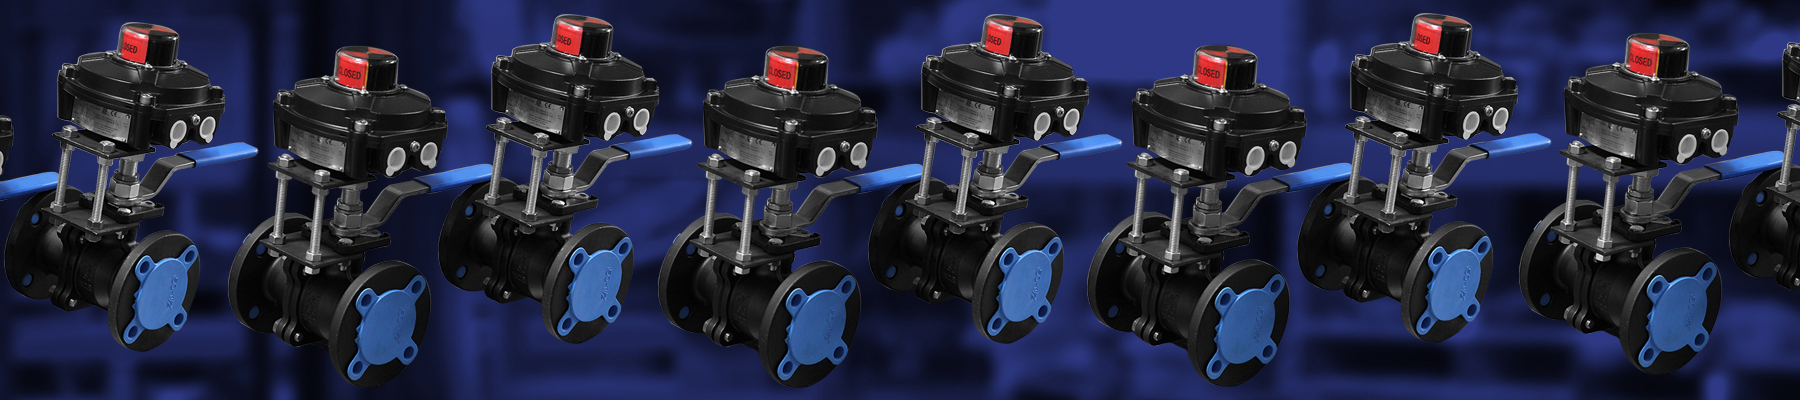 Manual Ball Valves w/ XP Limit Switches